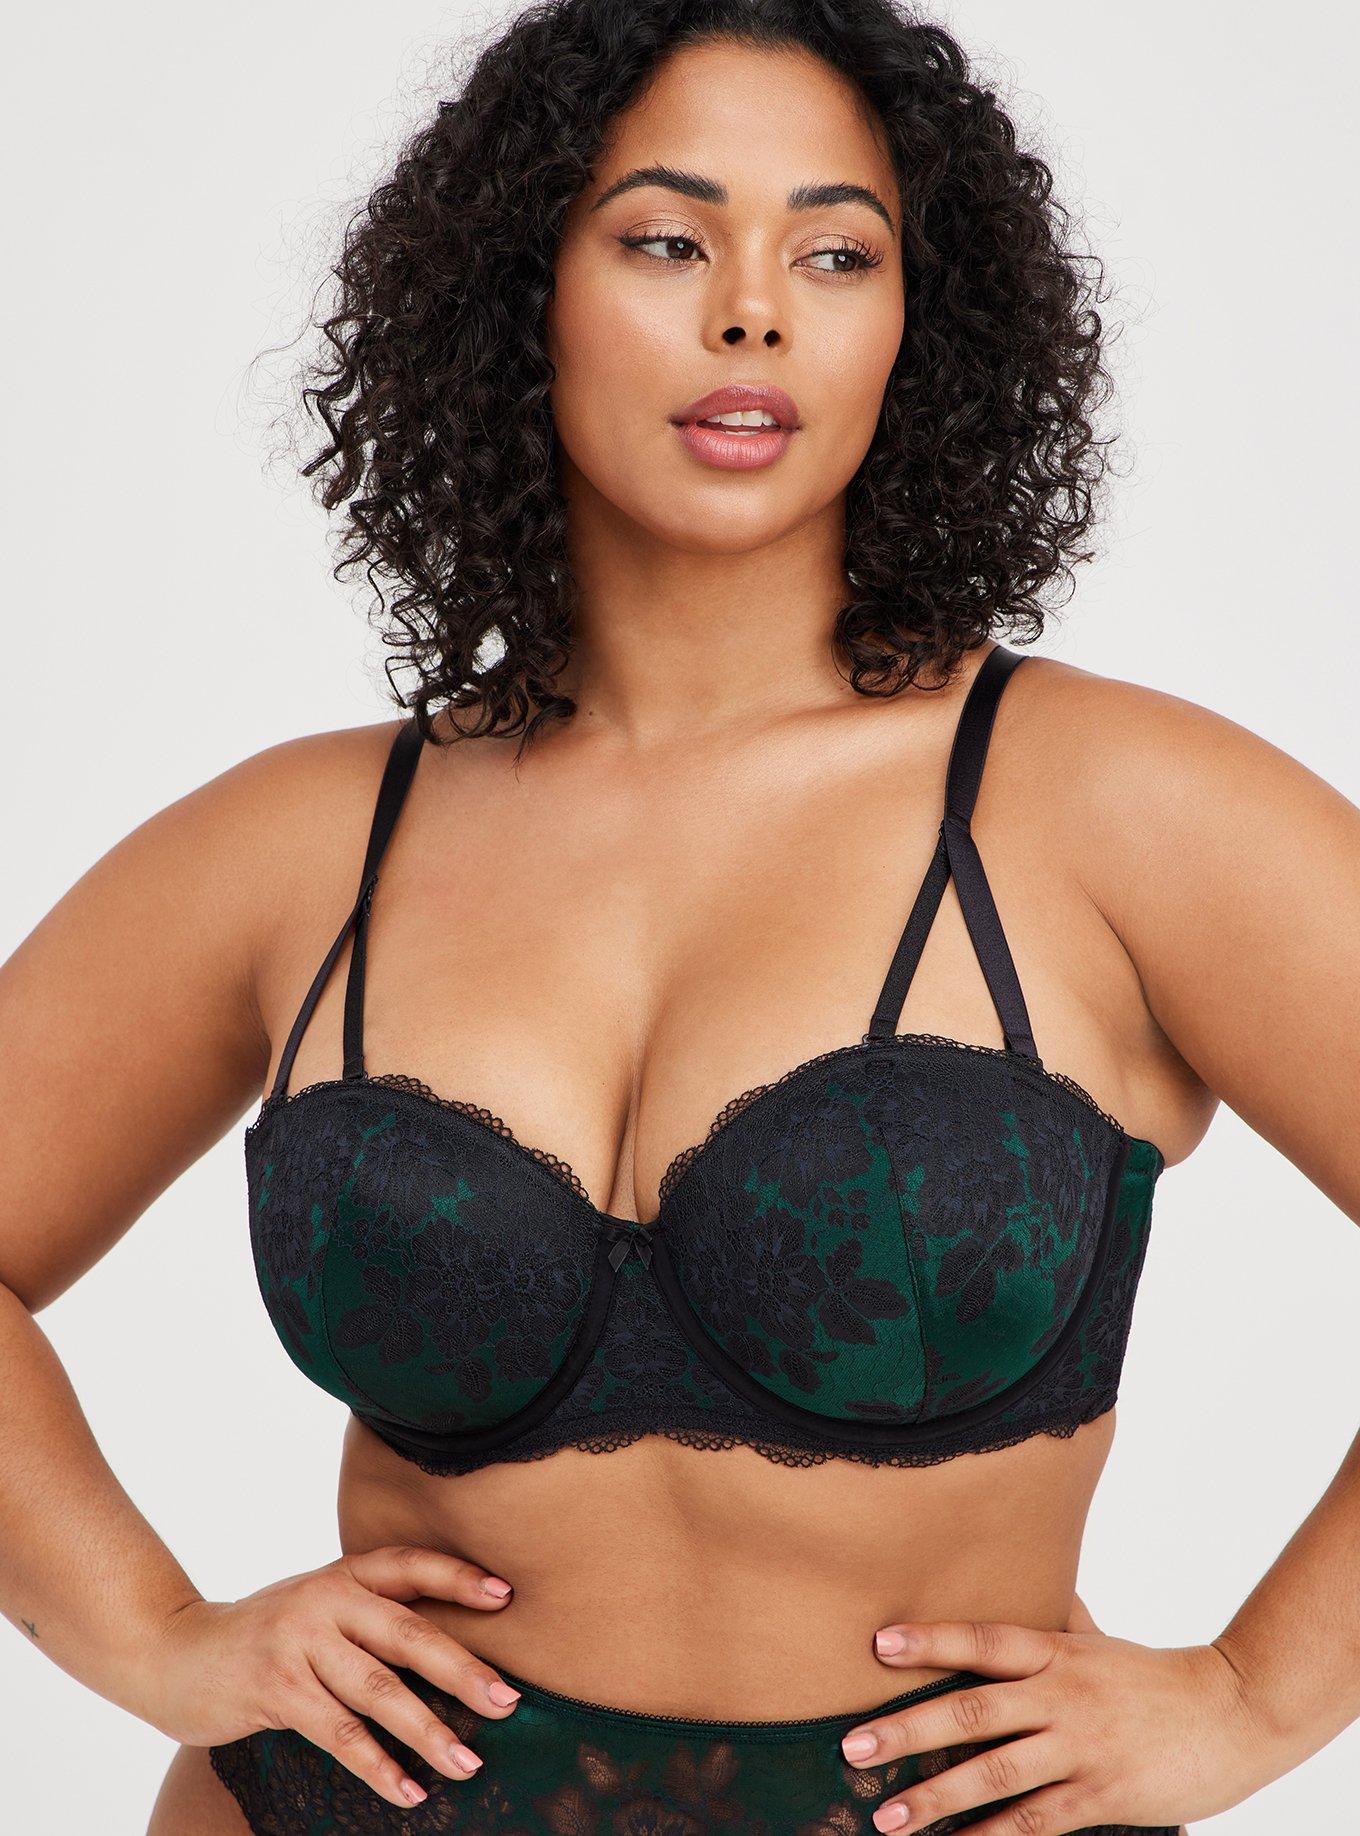 SUPER 2 SIZE PUSH UP BRA BOMBSHELL CUP A, VERY COMPARABLE WITH VS